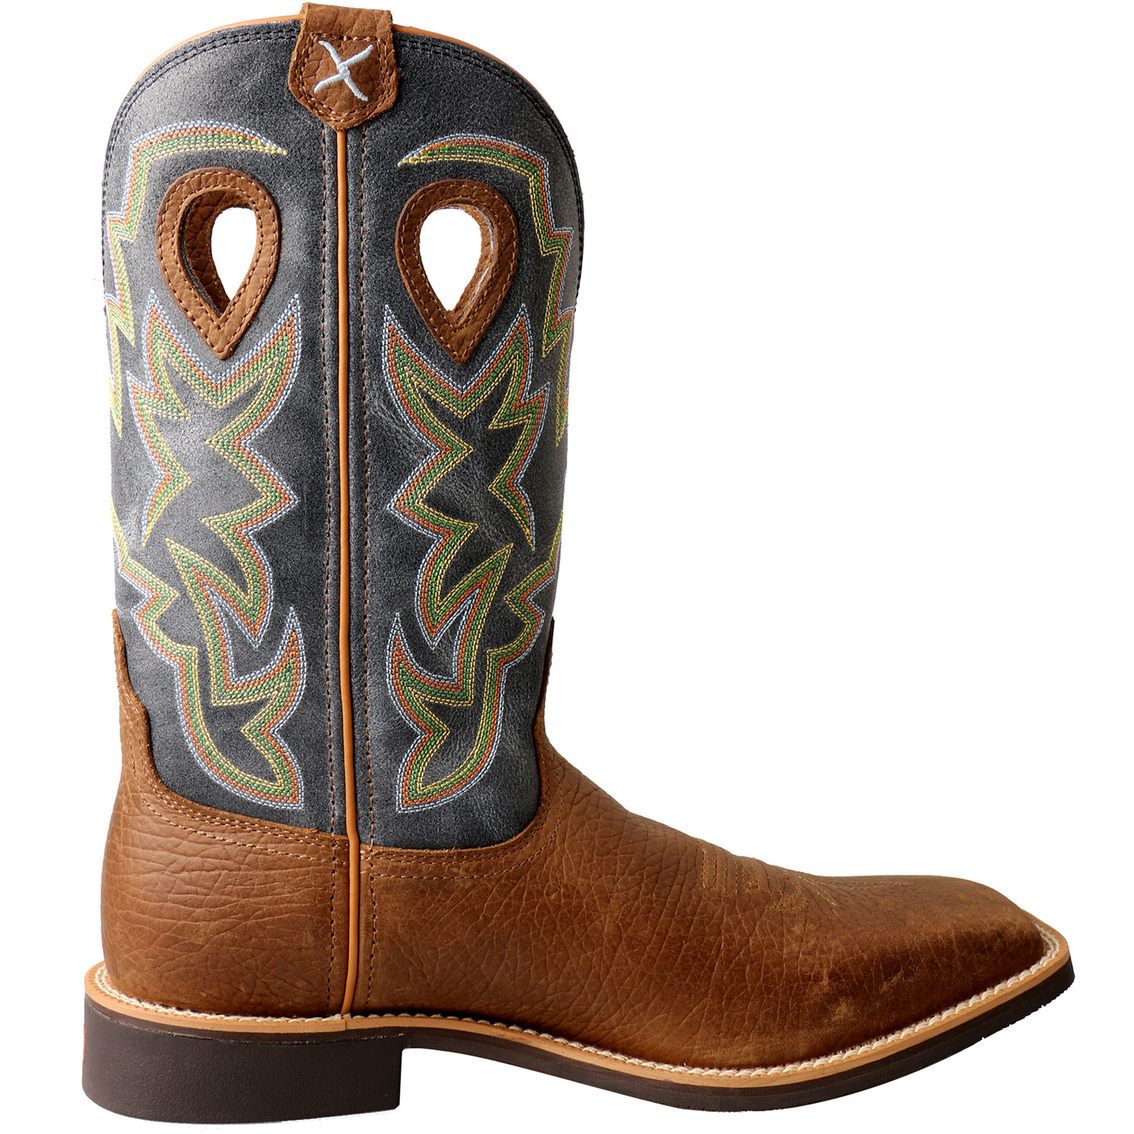 Twisted X Men's Top Hand Peanut Boots - Image 2 of 6